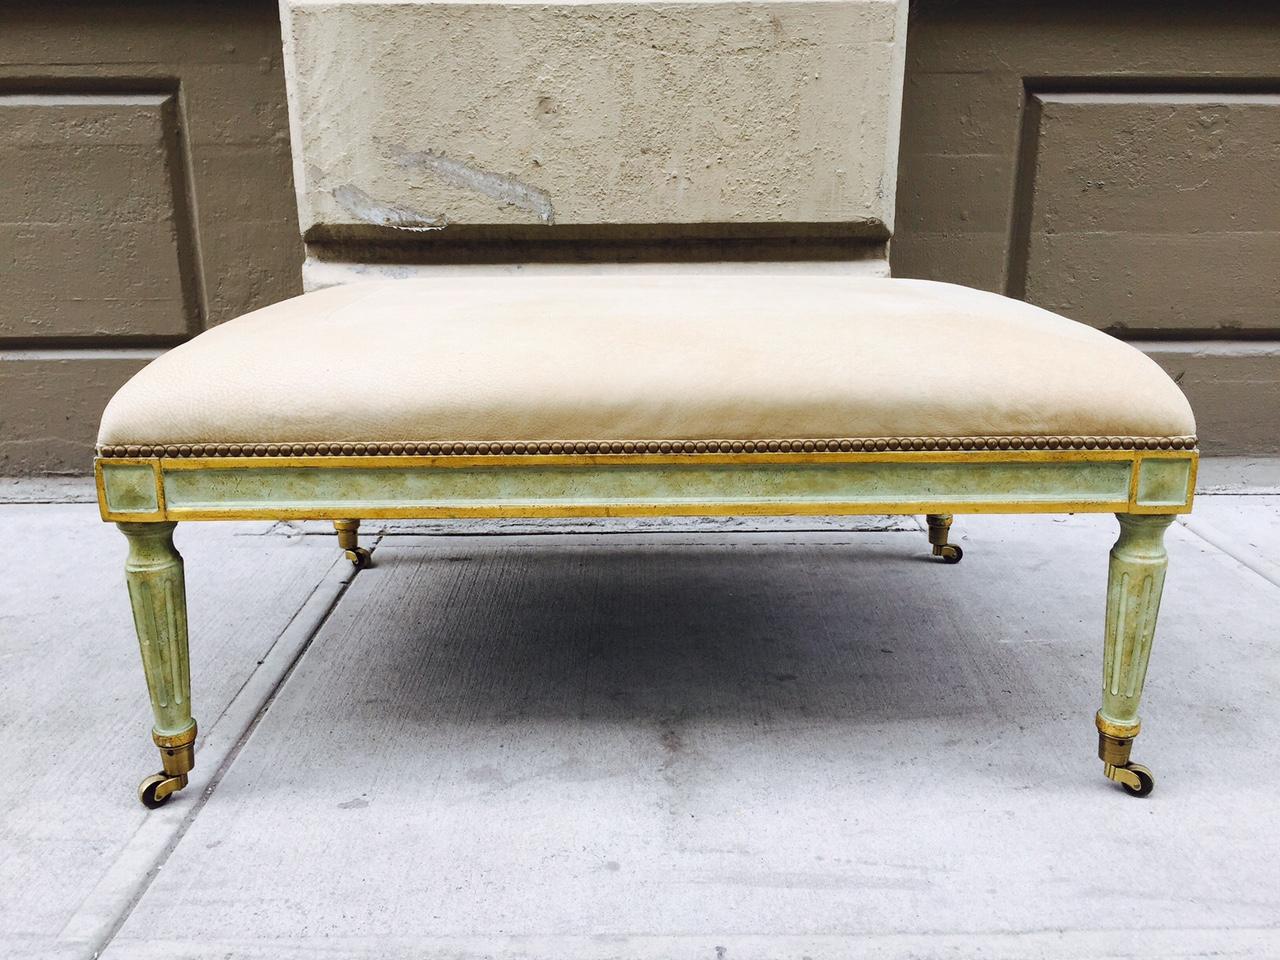 Oversized Louis XIV style ottoman with brass casters and upholstered in leather.